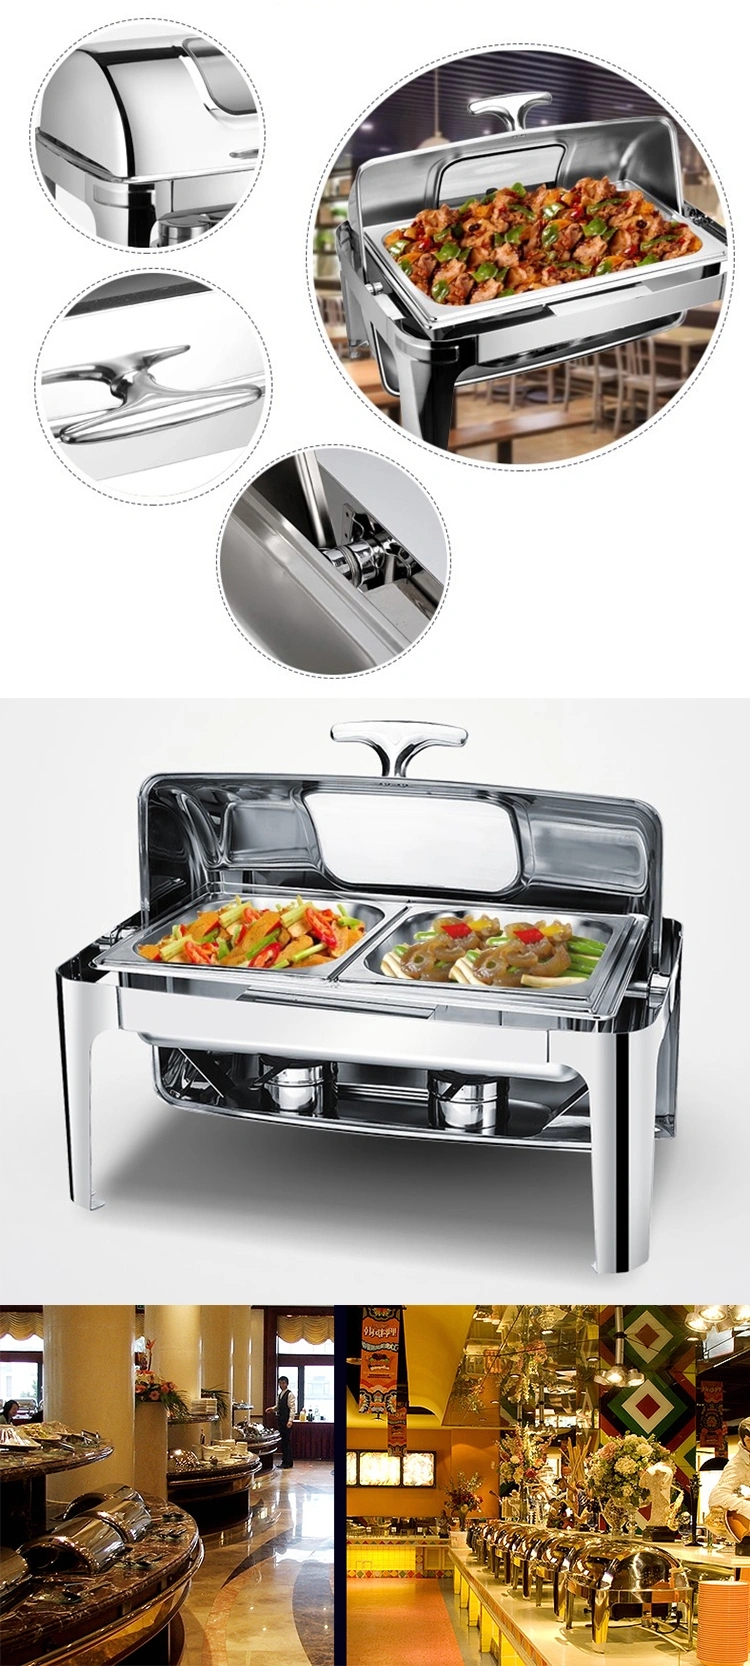 Hotel-Buffet-Food-Warmers-Catering-Equipment-Roll-Top-Chafing-Dish.webp (6).jpg